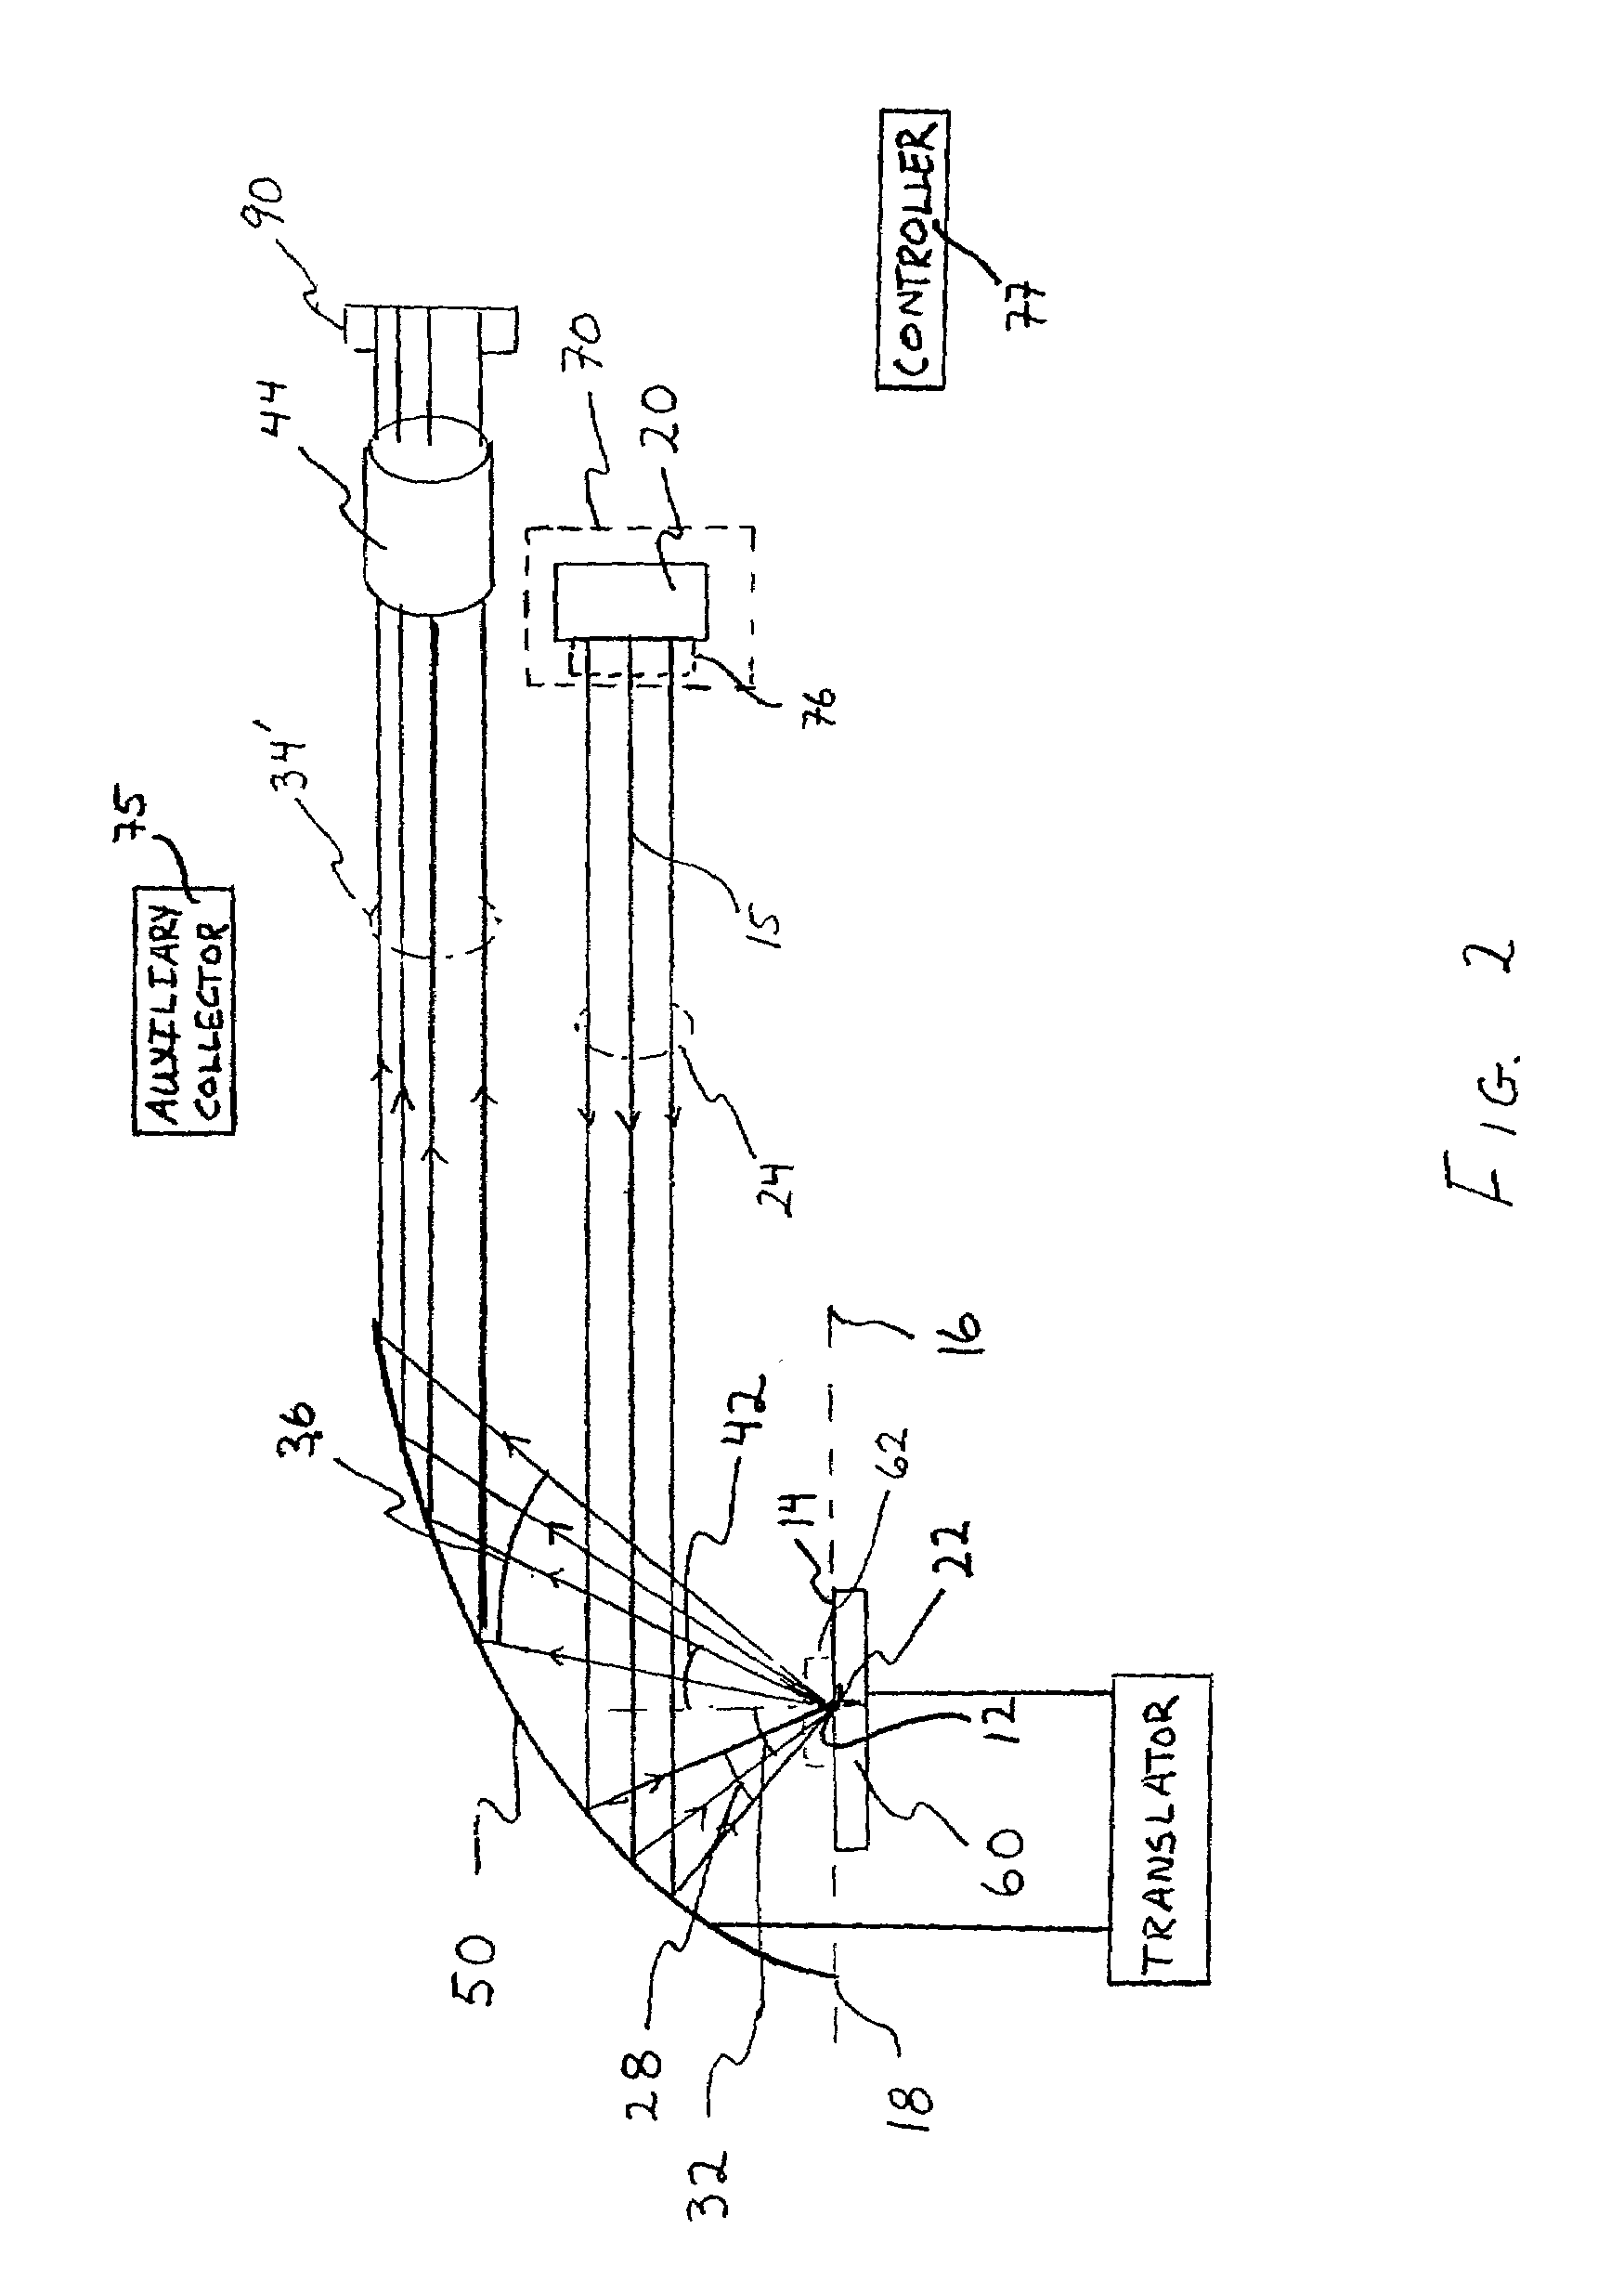 Apparatus and method for measuring spatially varying bidirectional reflectance distribution function